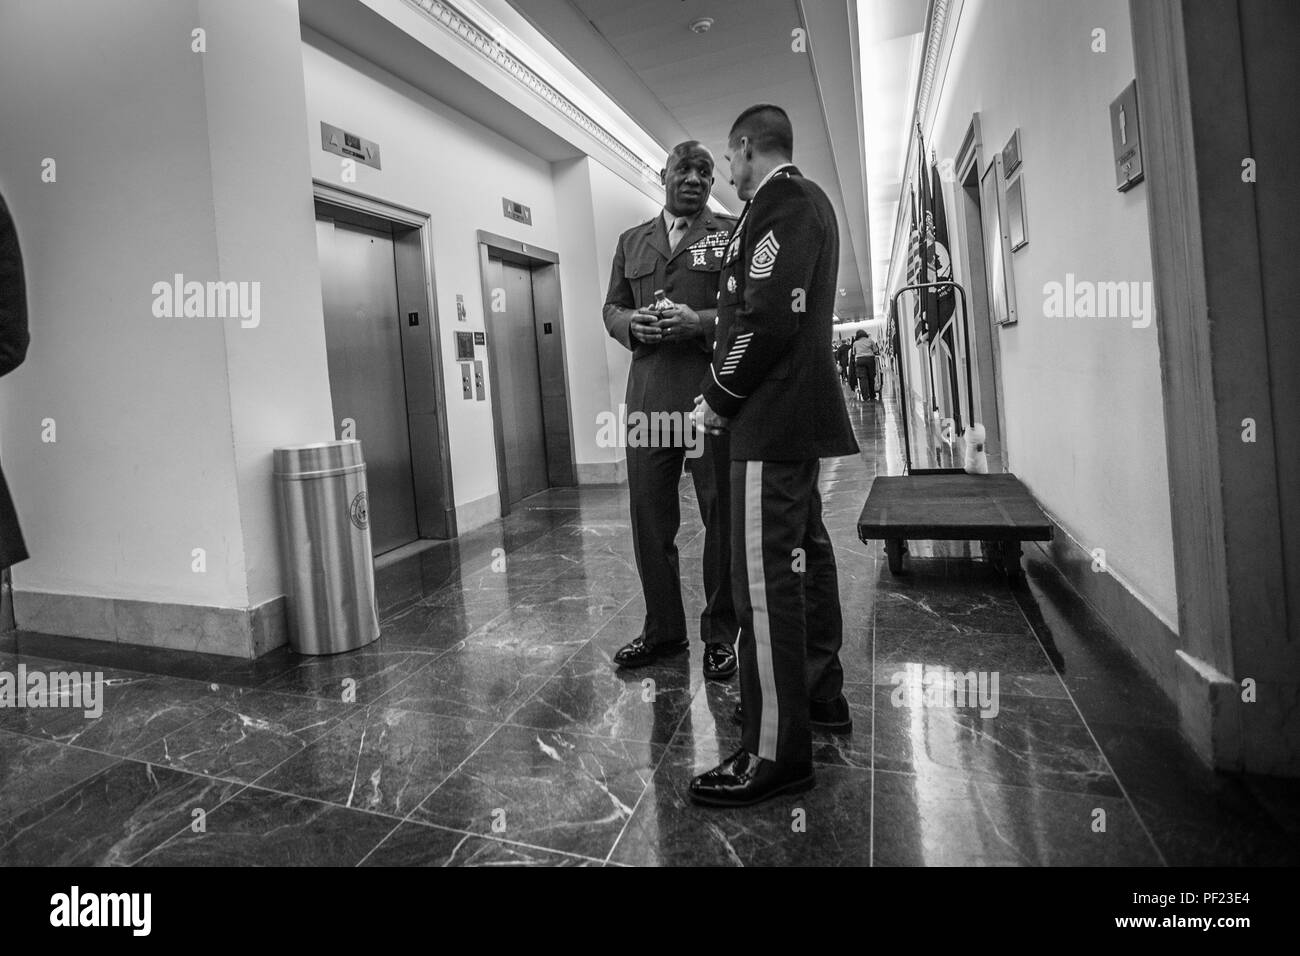 The 18th Sergeant Major of the Marine Corps, Ronald L. Green, speaks with members of the Committee on Appropriations, Military Construction, U.S. House of Representatives, at Capitol Hill, Washington D.C., Feb. 23, 2016. Sgt. Maj. Green was making final preparations prior to his testimony on the quality of life within the Marine Corps. (U.S. Marine Corps photo by Sgt. Melissa Marnell, Office of the Sergeant Major of the Marine Corps/Released) Stock Photo